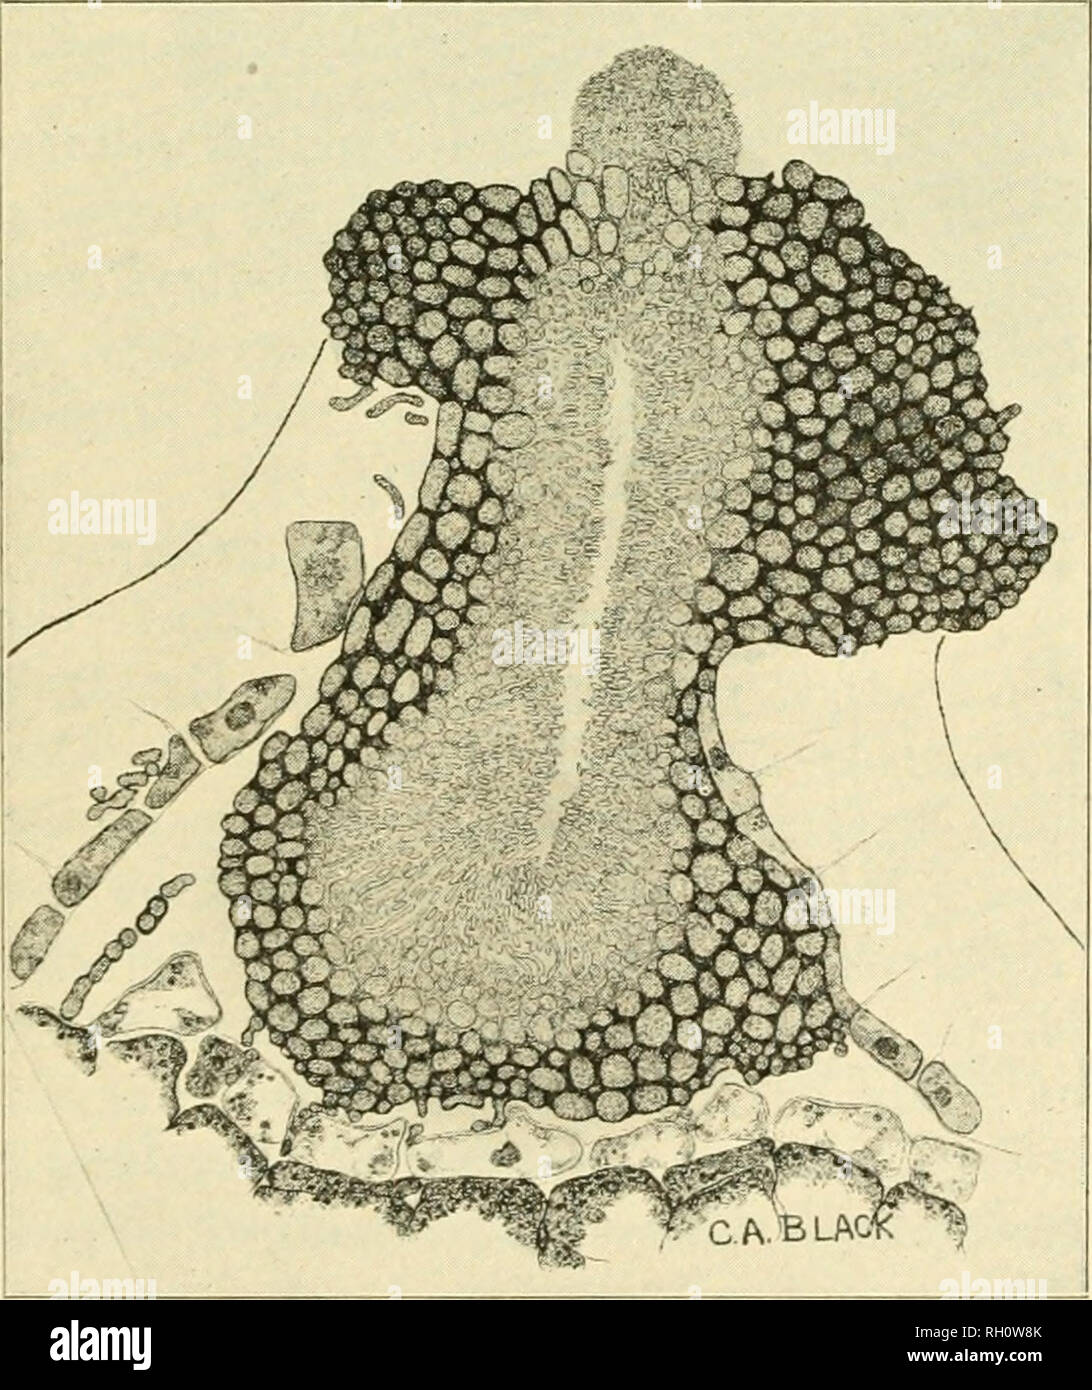 . Bulletin. Agriculture. Fig. 9.—A section corky cells beneath. Fig. 10. A pycnidium of Phoma Pomi. The escaping spores may be seen above. thru a Fruit Spot. The the epidermis are shown above, while below are seen the brown and with- ered cells produced :n the later development of the spot. The fungus can be seen in the pocket in the center. colored. (Frontis- piece.) Numerous black specks ap- pear, sometimes causing the center of the spot to have an almost uniformly black appearance (Fig. 8). The tissue beneath the spot is rendered brown and corky to a depth of several cells (Fig. 9). Cold st Stock Photo